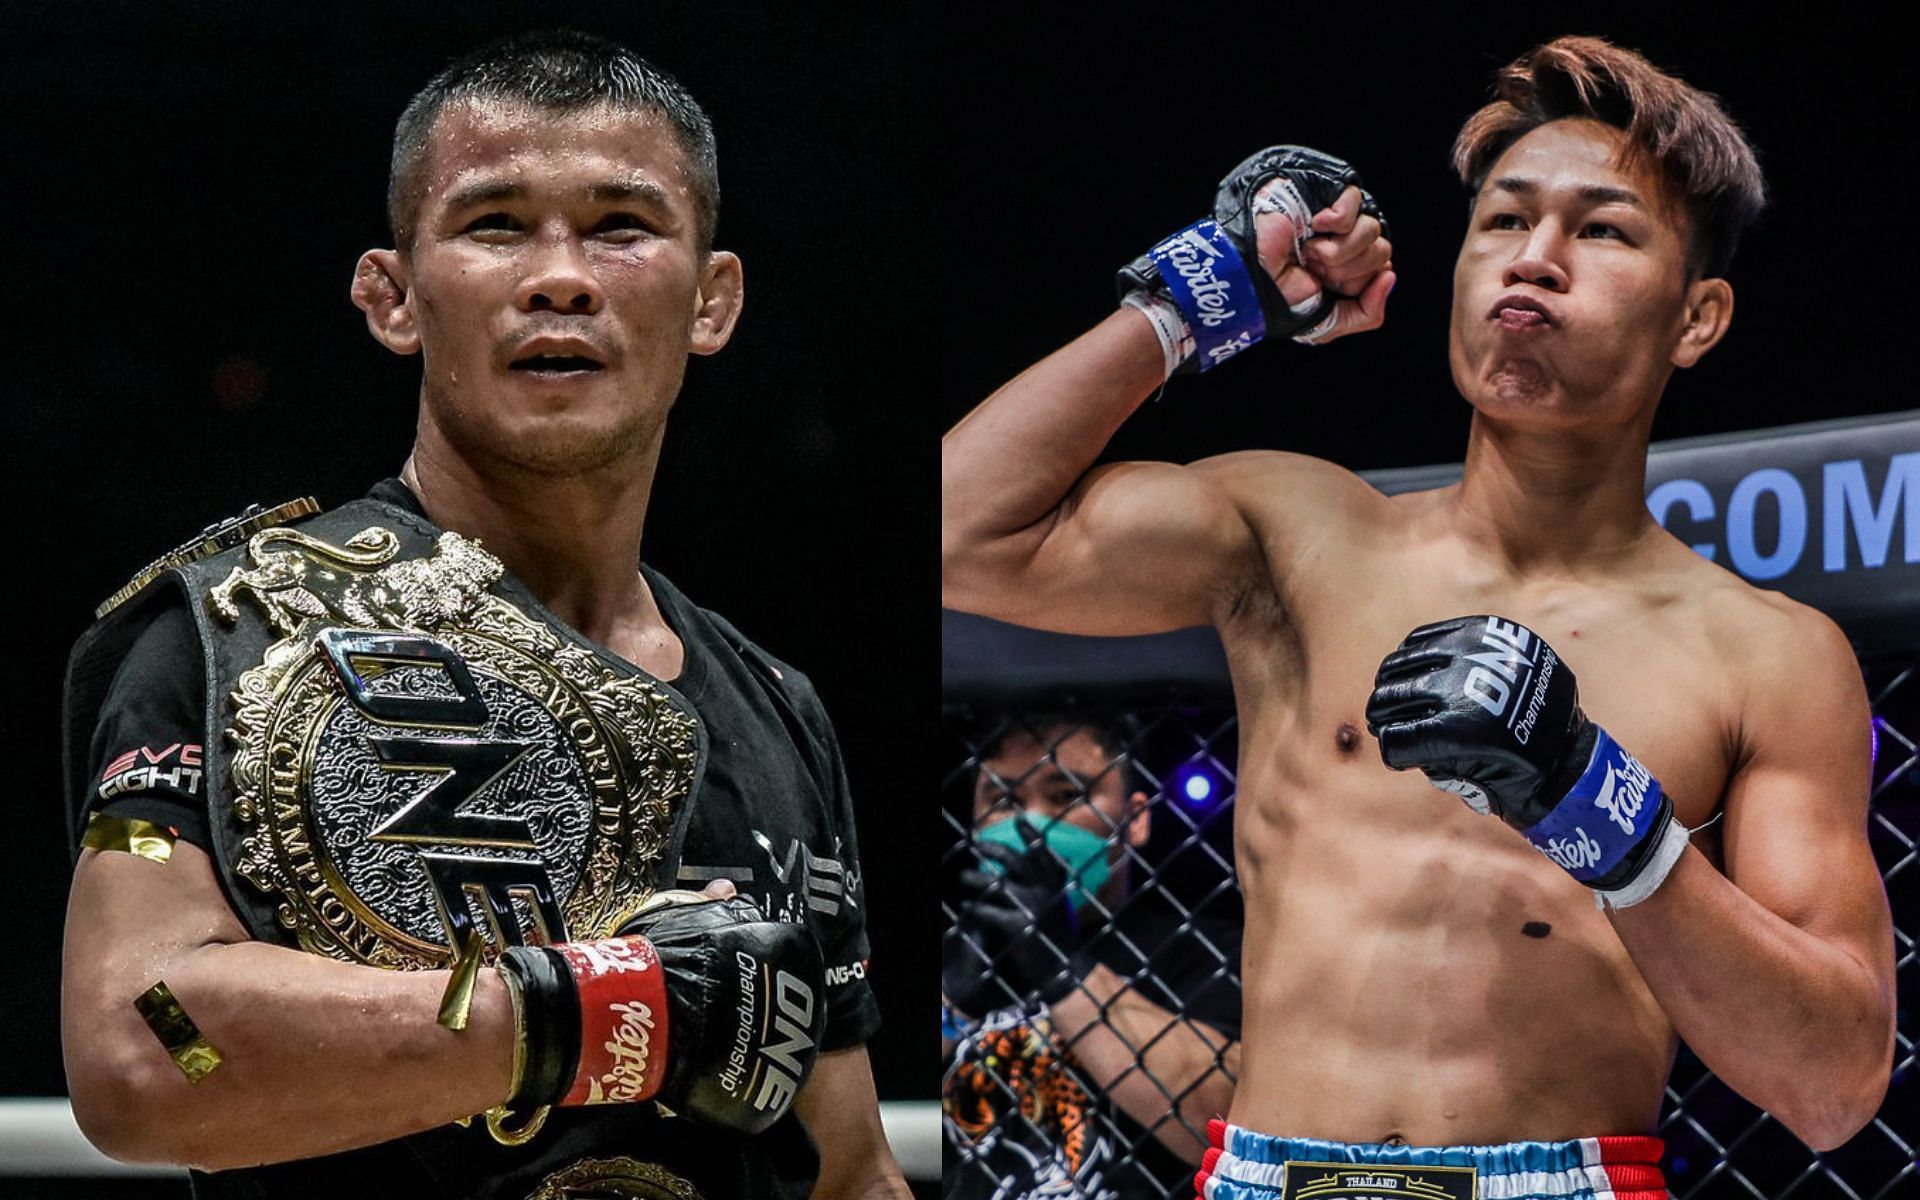 Rittewada is ready to challenge Nong-O for the ONE kickboxing bantamweight title